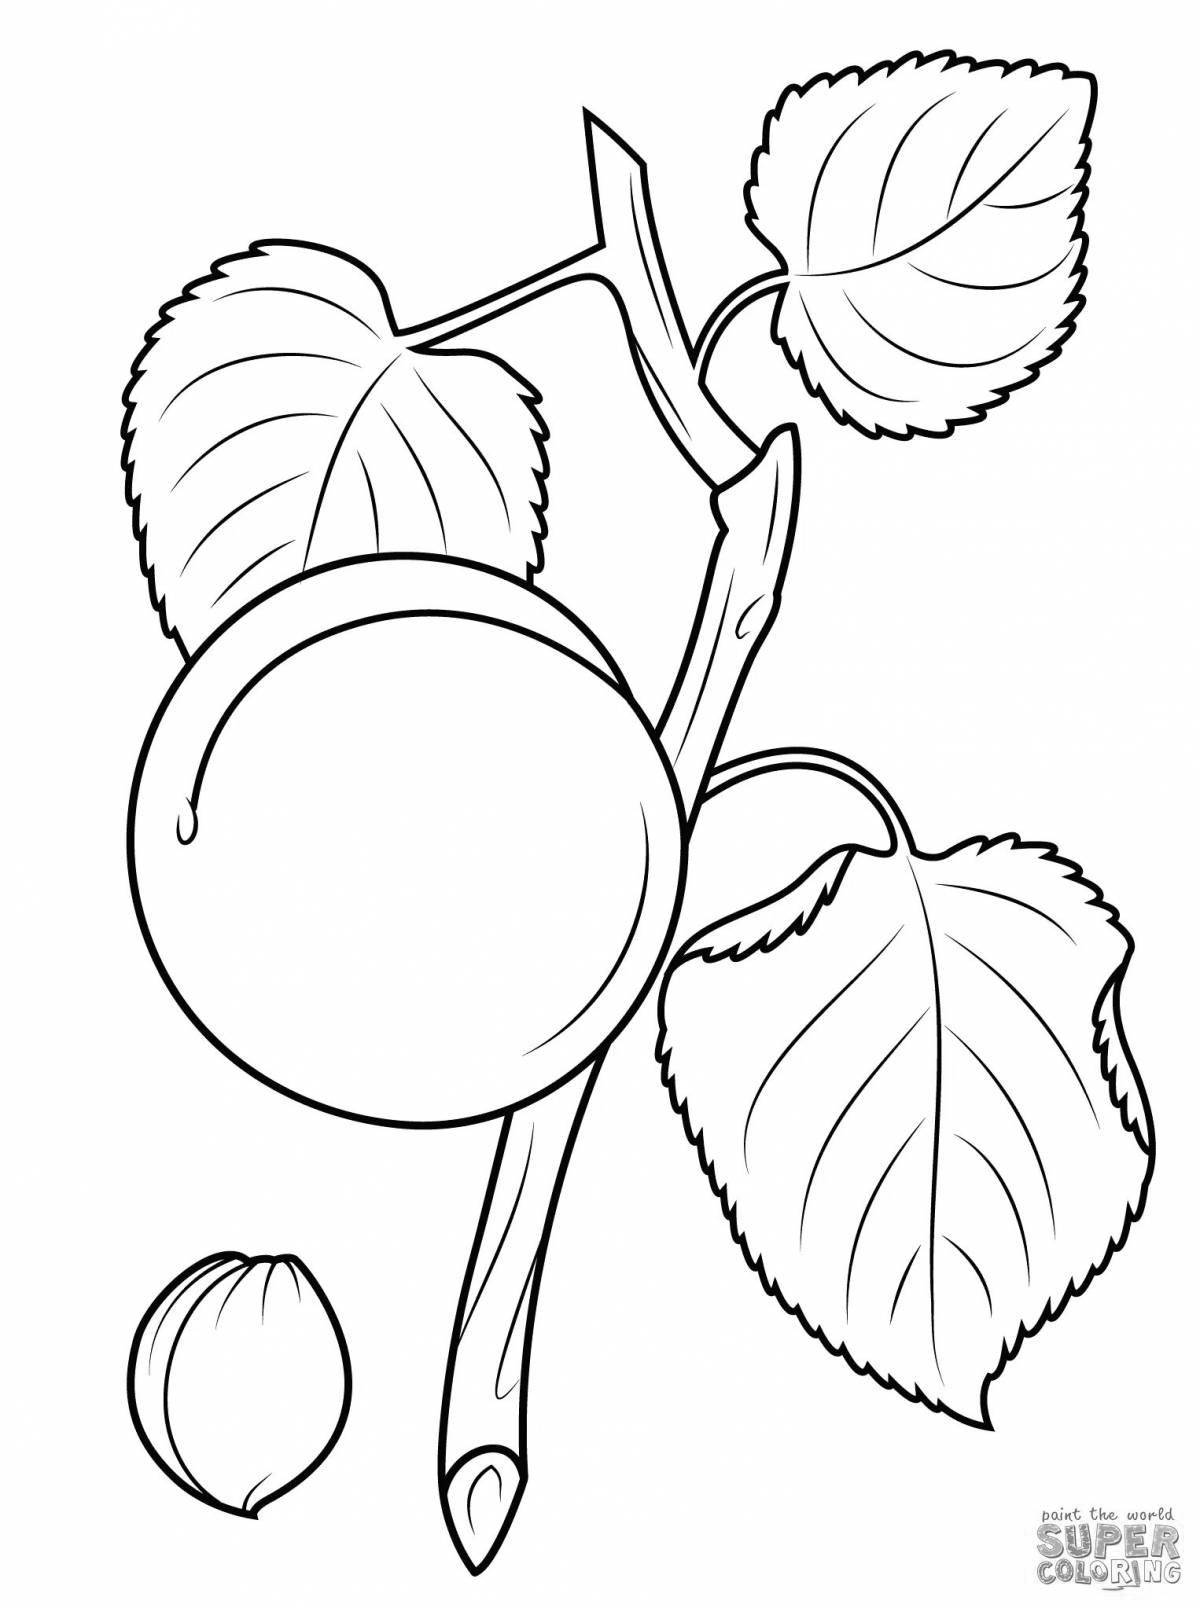 Outstanding apricot coloring book for kids